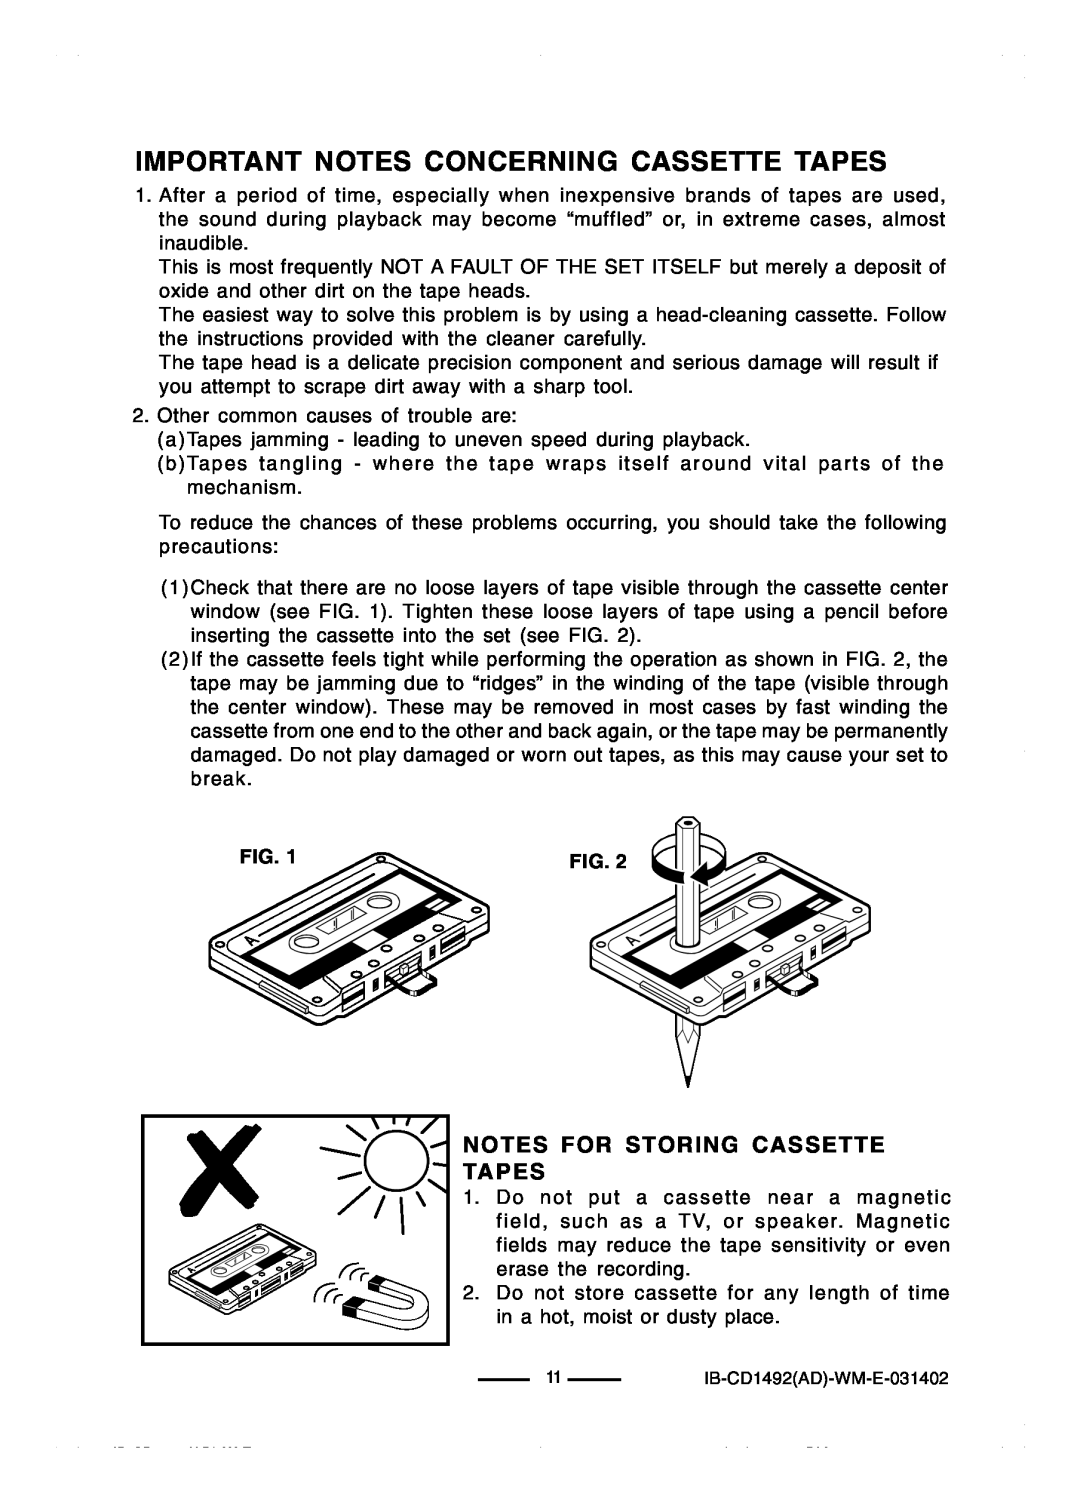 Lenoxx Electronics CD-1492 Important Notes Concerning Cassette Tapes, Notes For Storing Cassette Tapes 